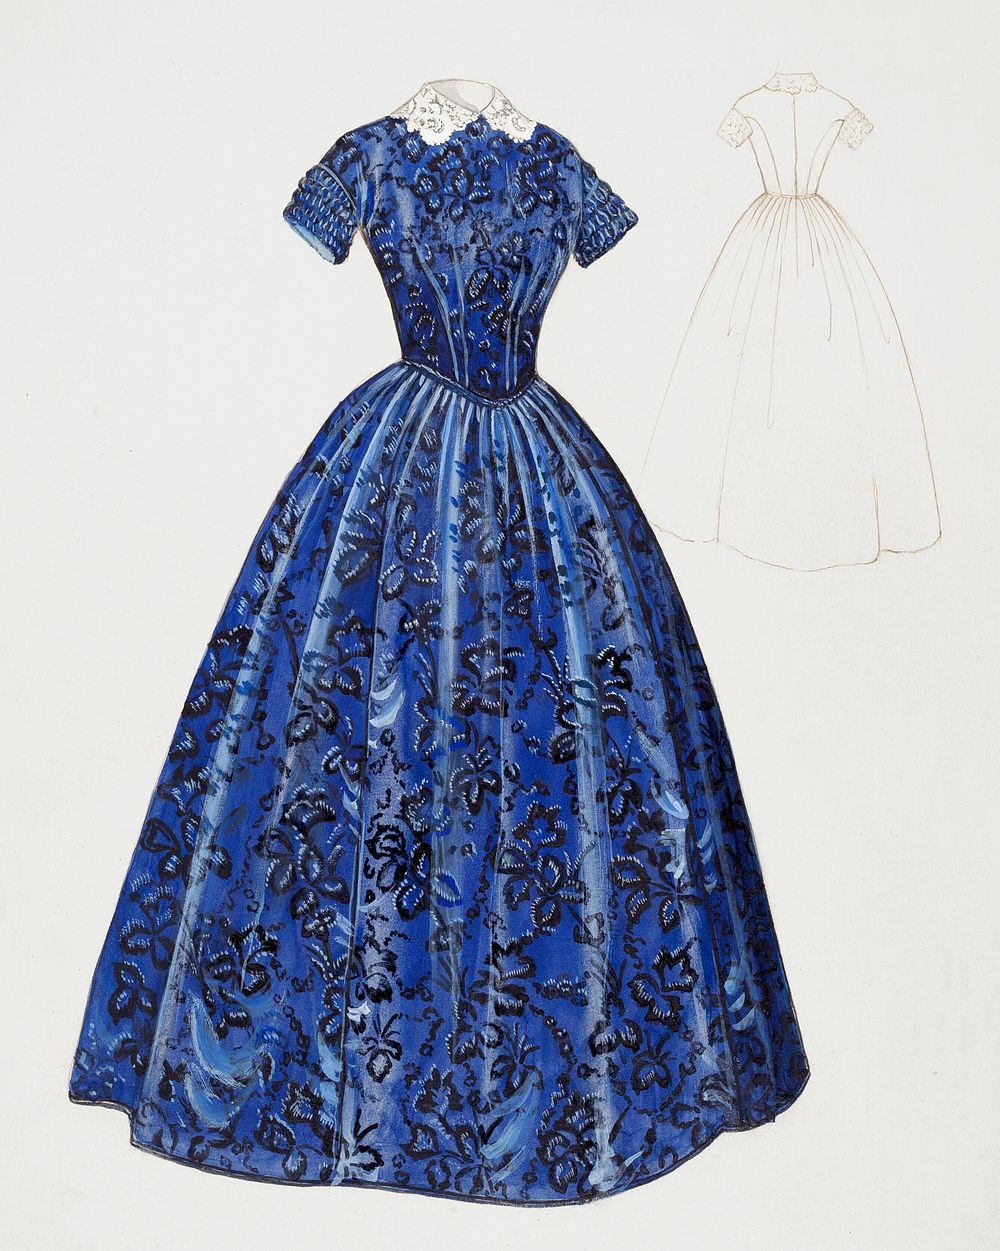 Dress (c. 1936) by Jessie M. Benge. Original from The National Gallery of Art. Digitally enhanced by rawpixel.